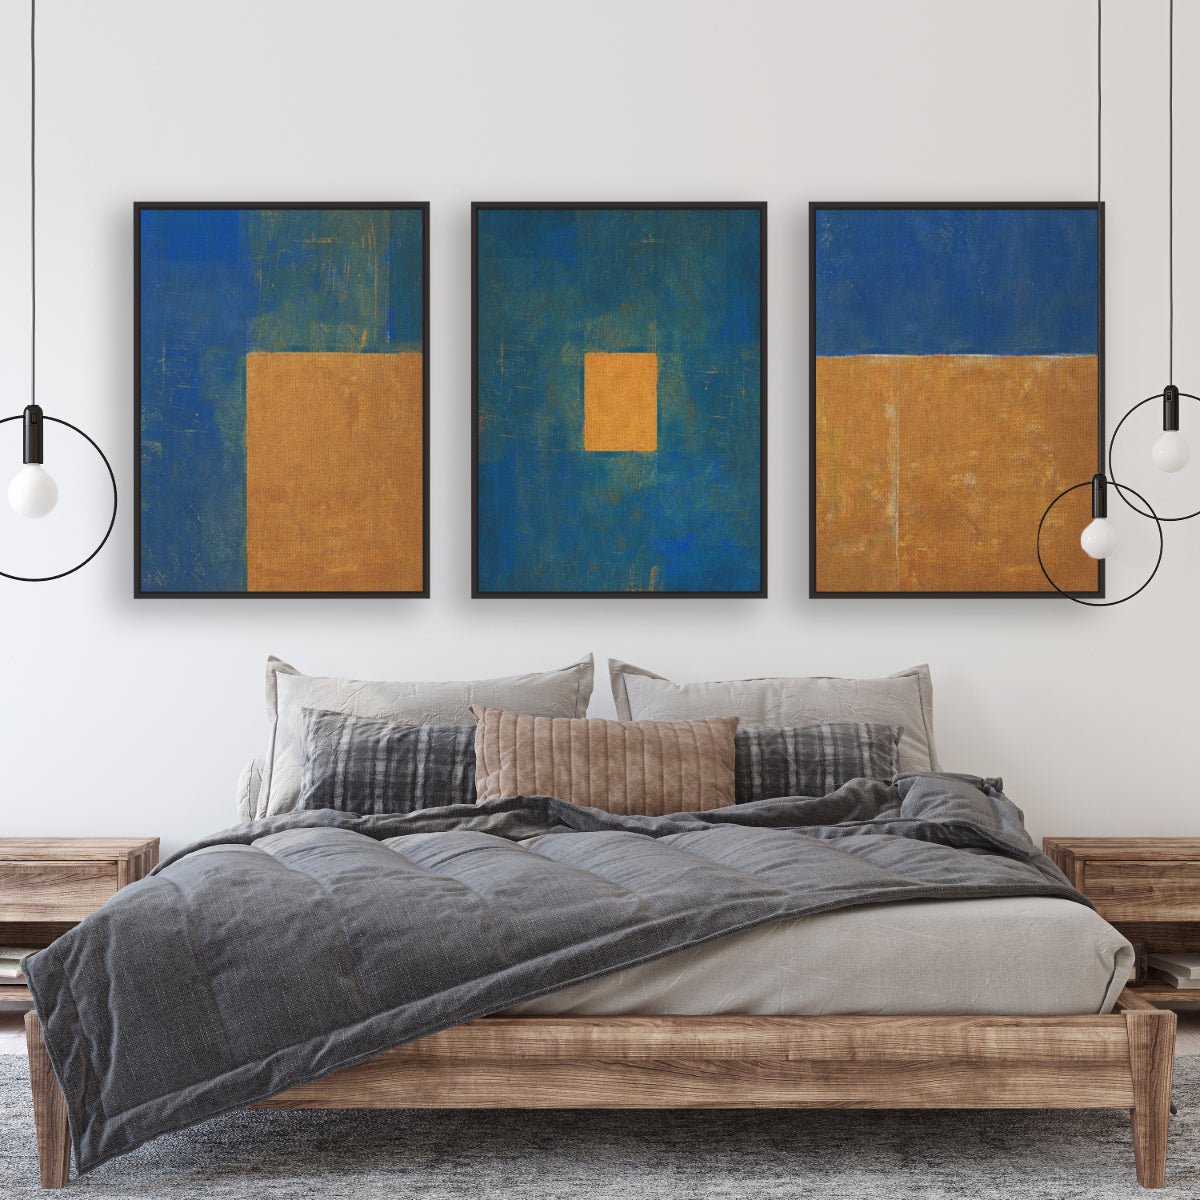 Gold Rush large canvas framed 3 piece large canvas wall art piece for sale at Vybe Interior